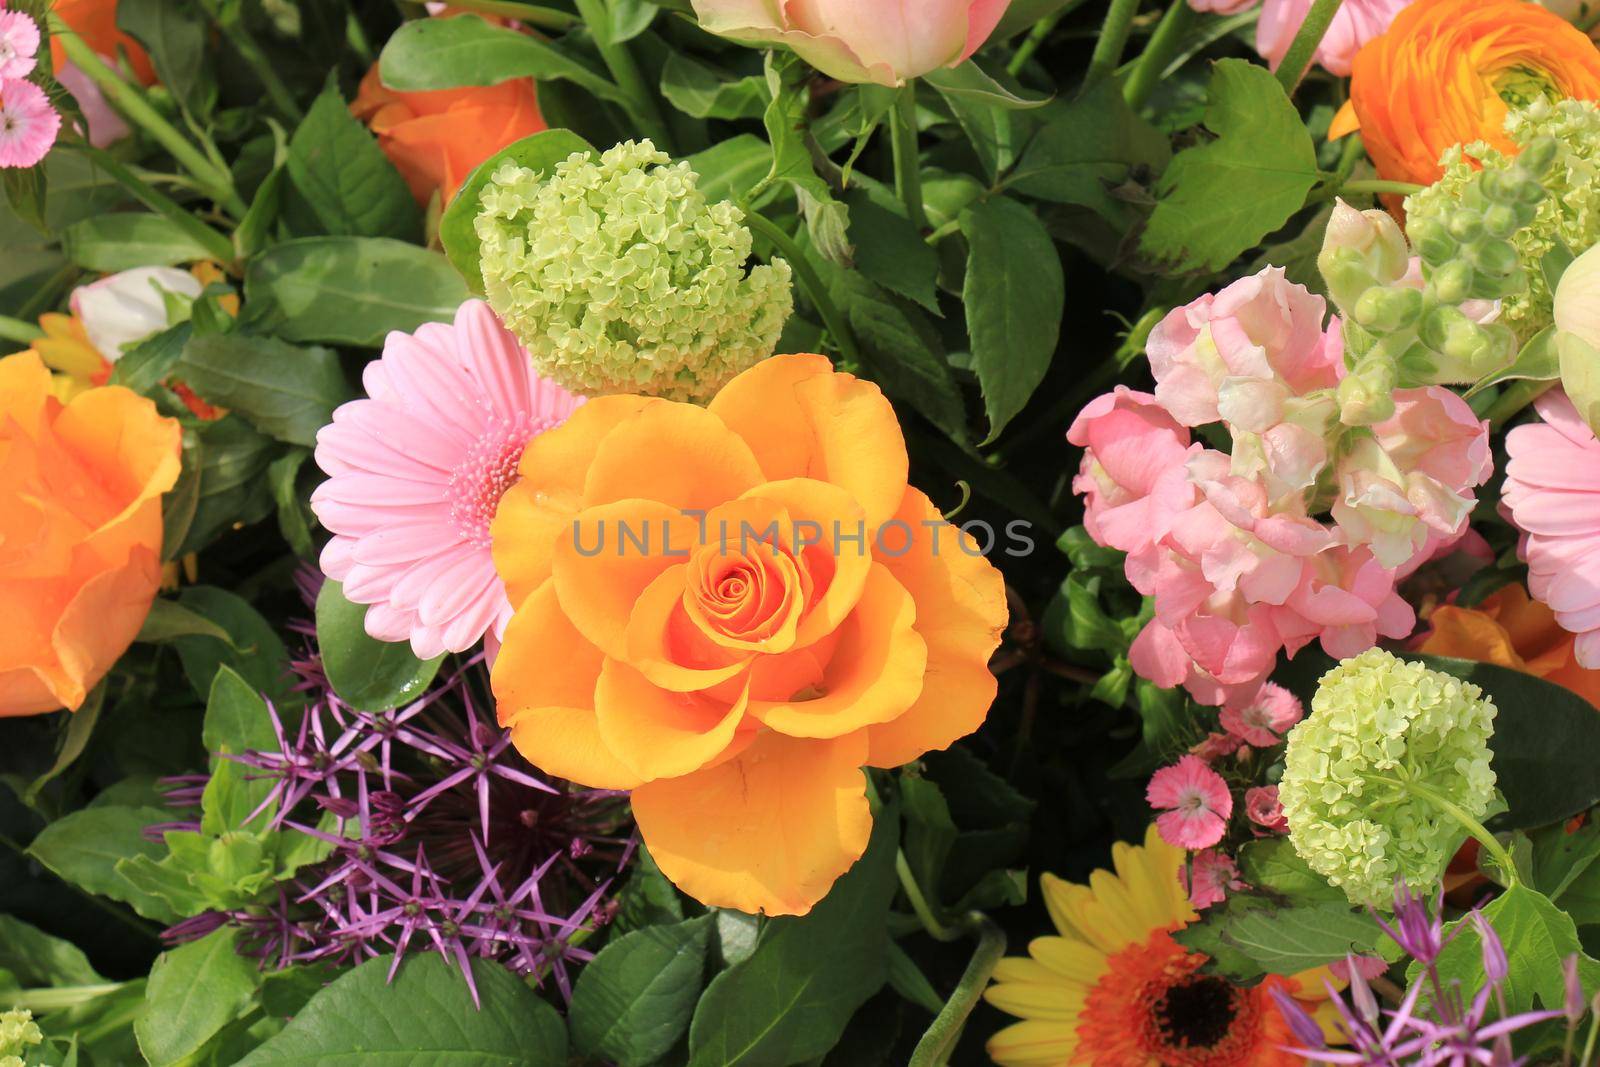 Mixed flower arrangement: various flowers in different shades of pink and orange for a wedding by studioportosabbia